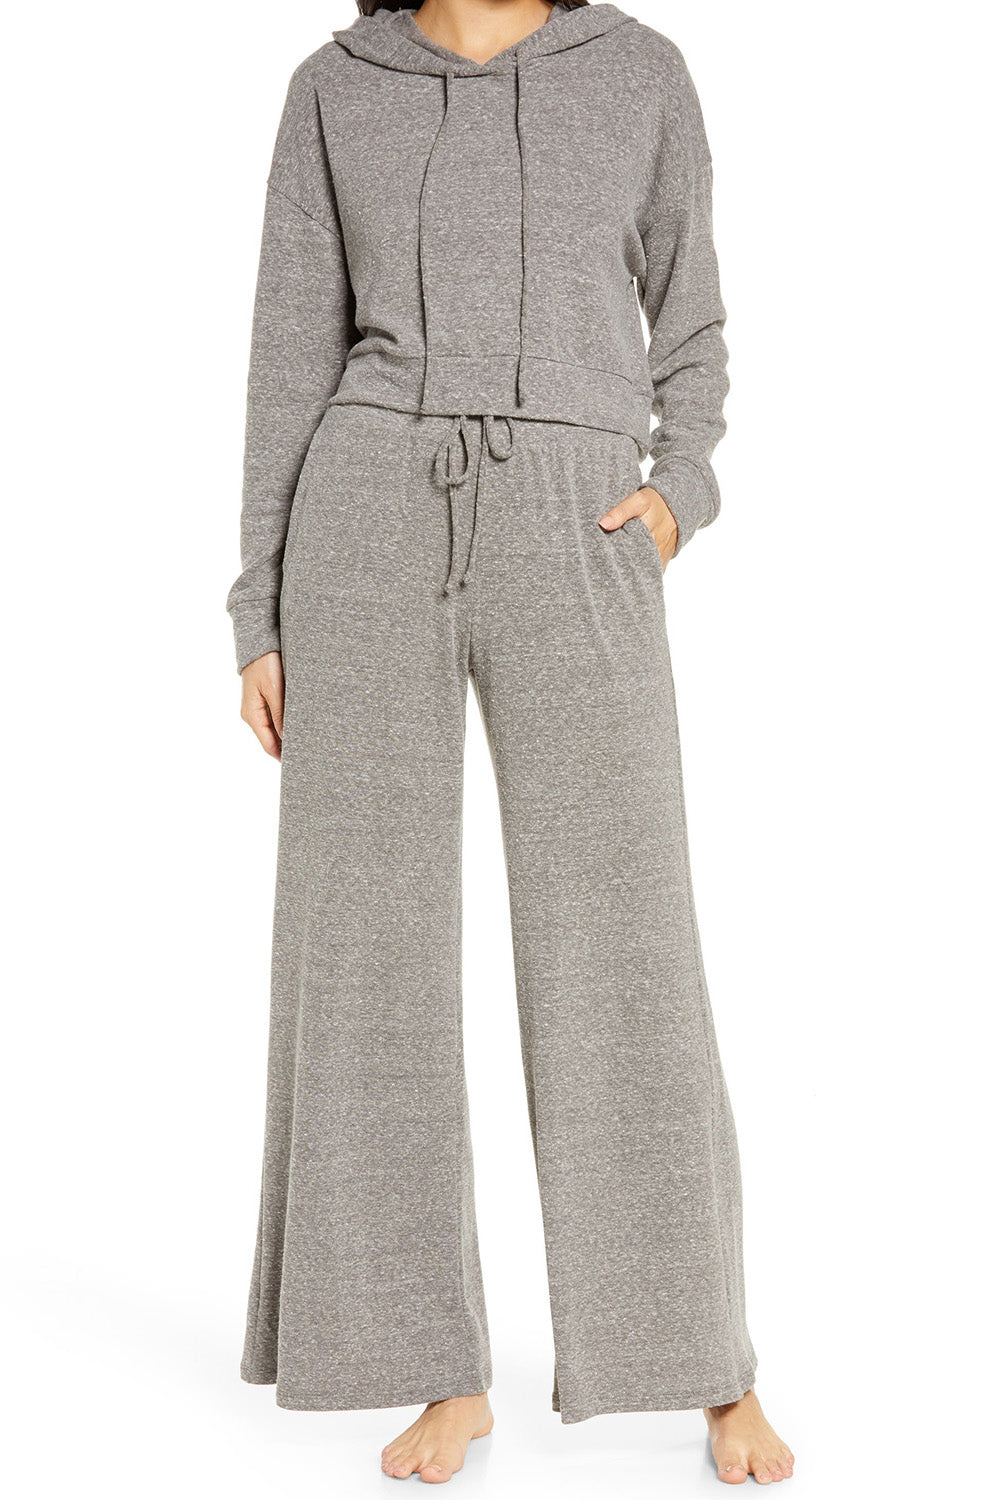 Gray Solid Drop Shoulder Hoodie and Wide Leg Pants Outfit Loungewear JT's Designer Fashion